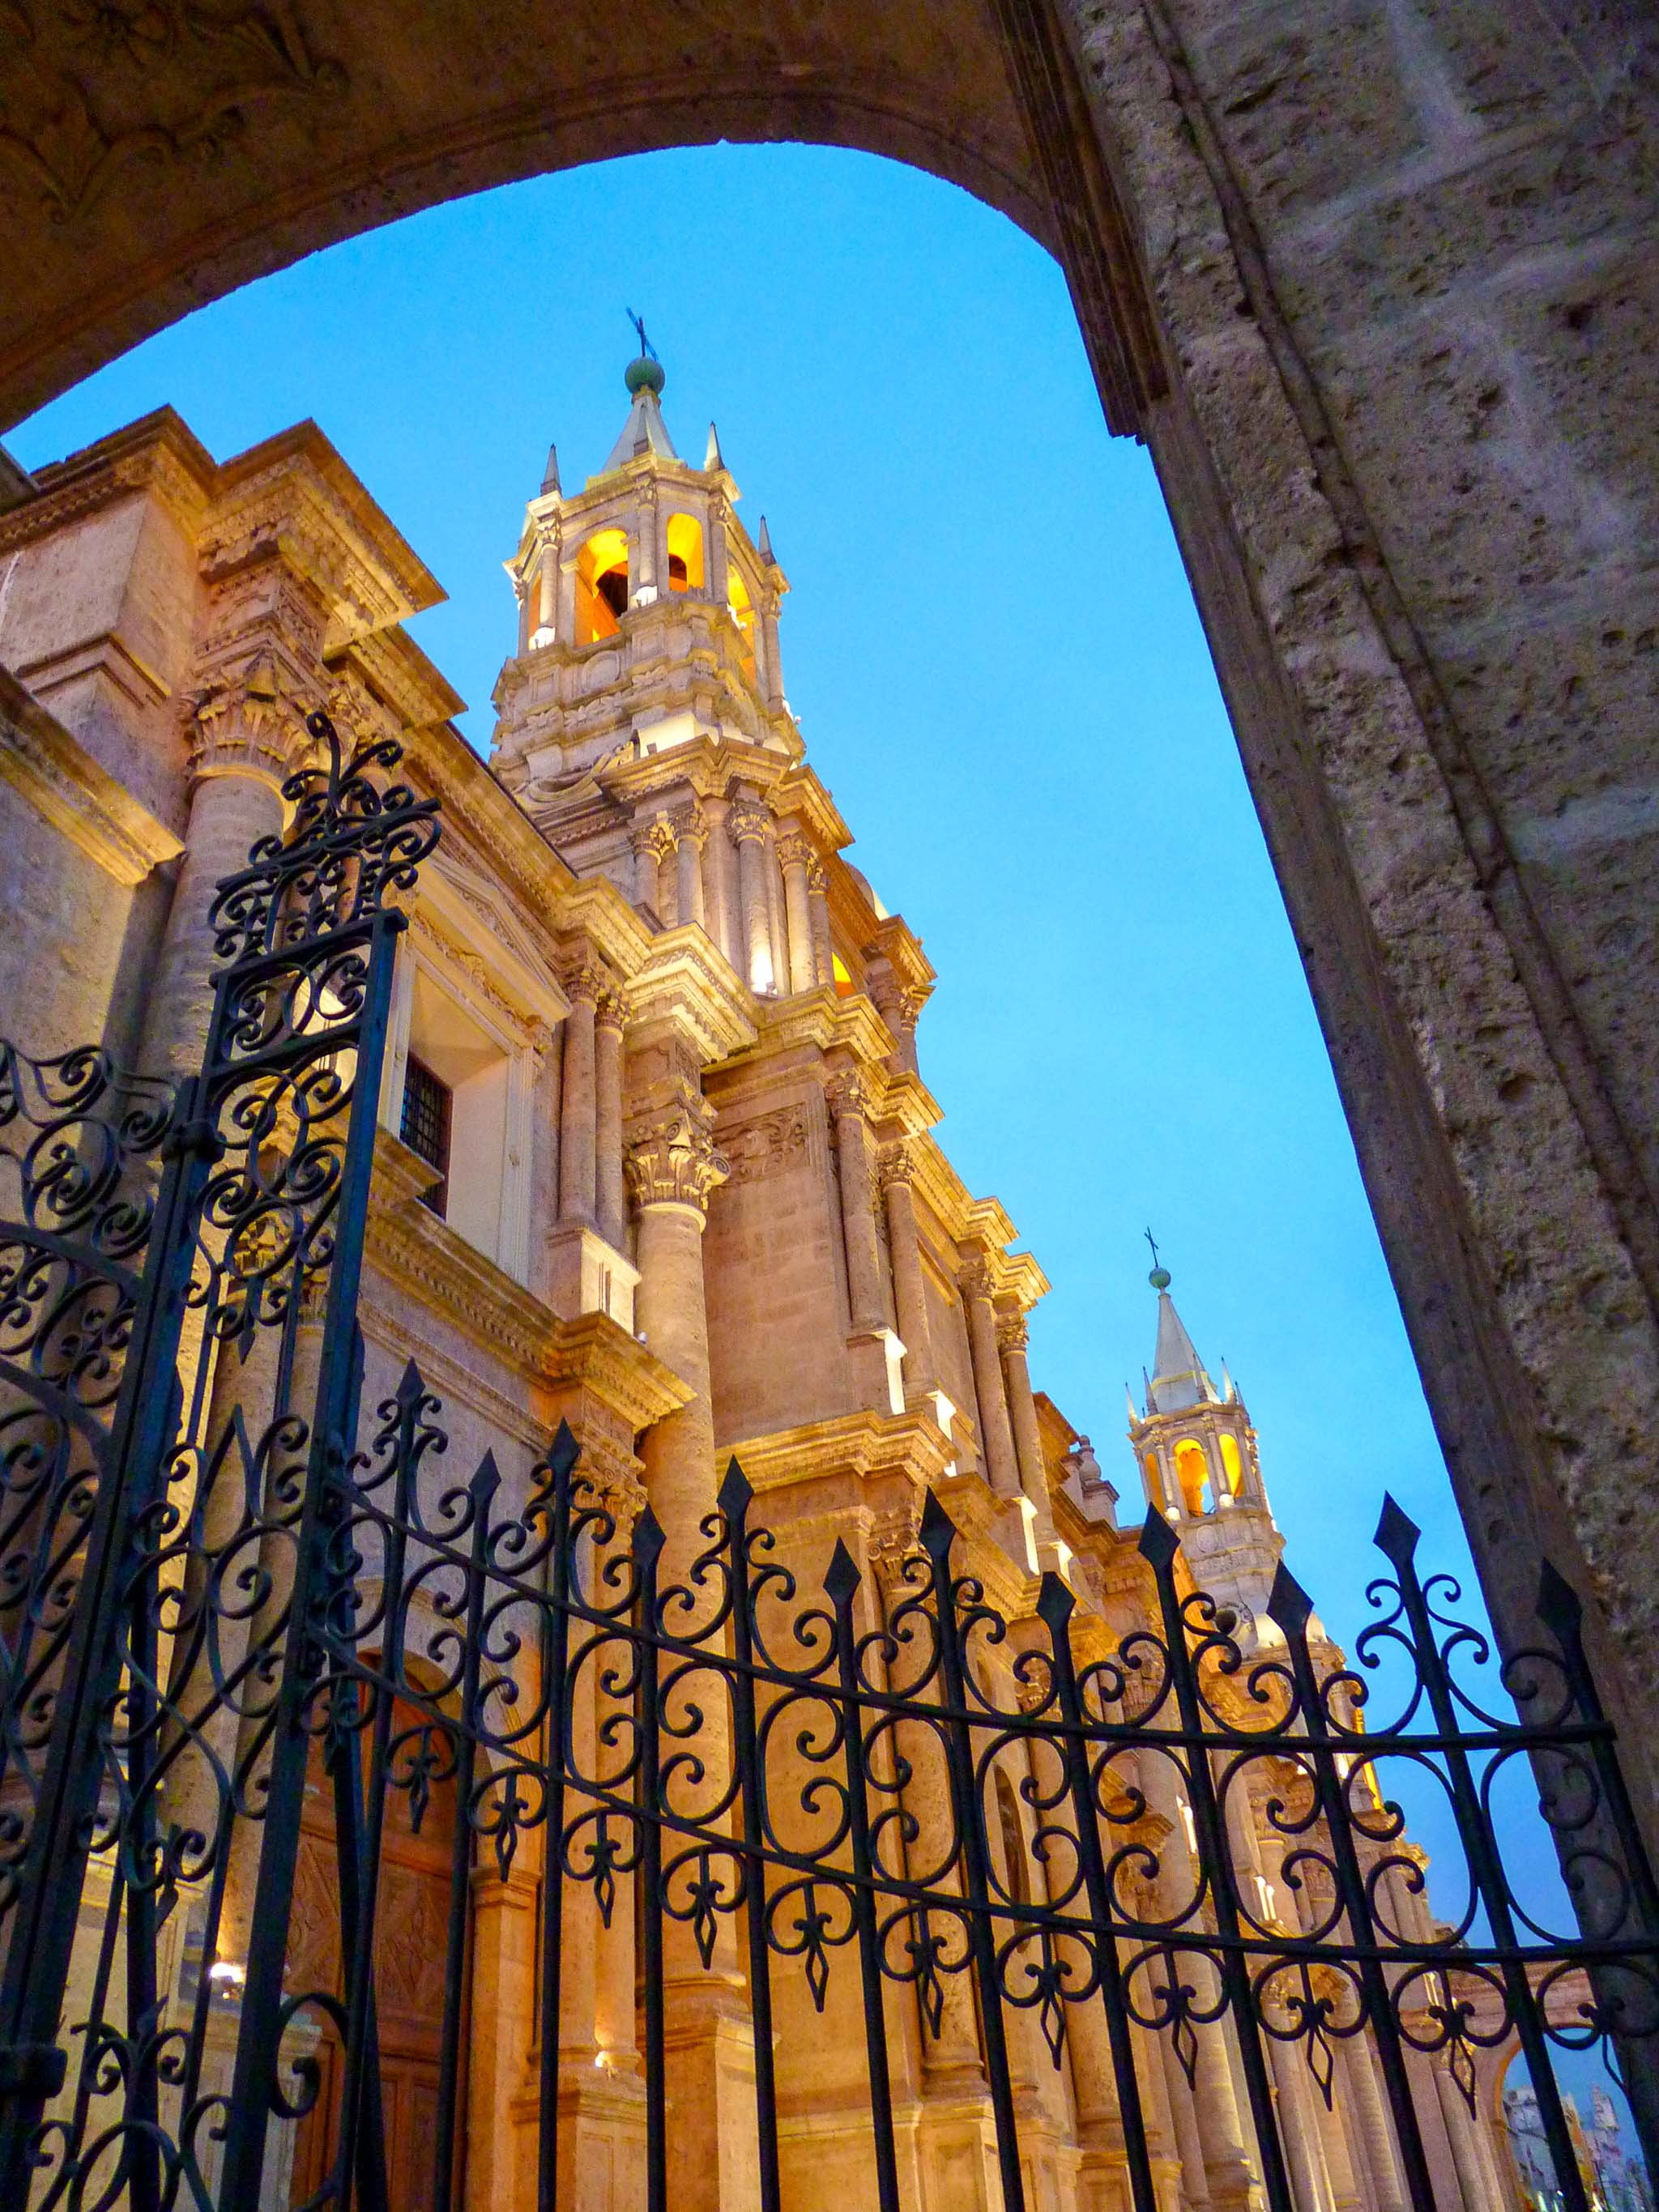  We have curated the best   Arequipa Tours    Book them with Your Room Here  